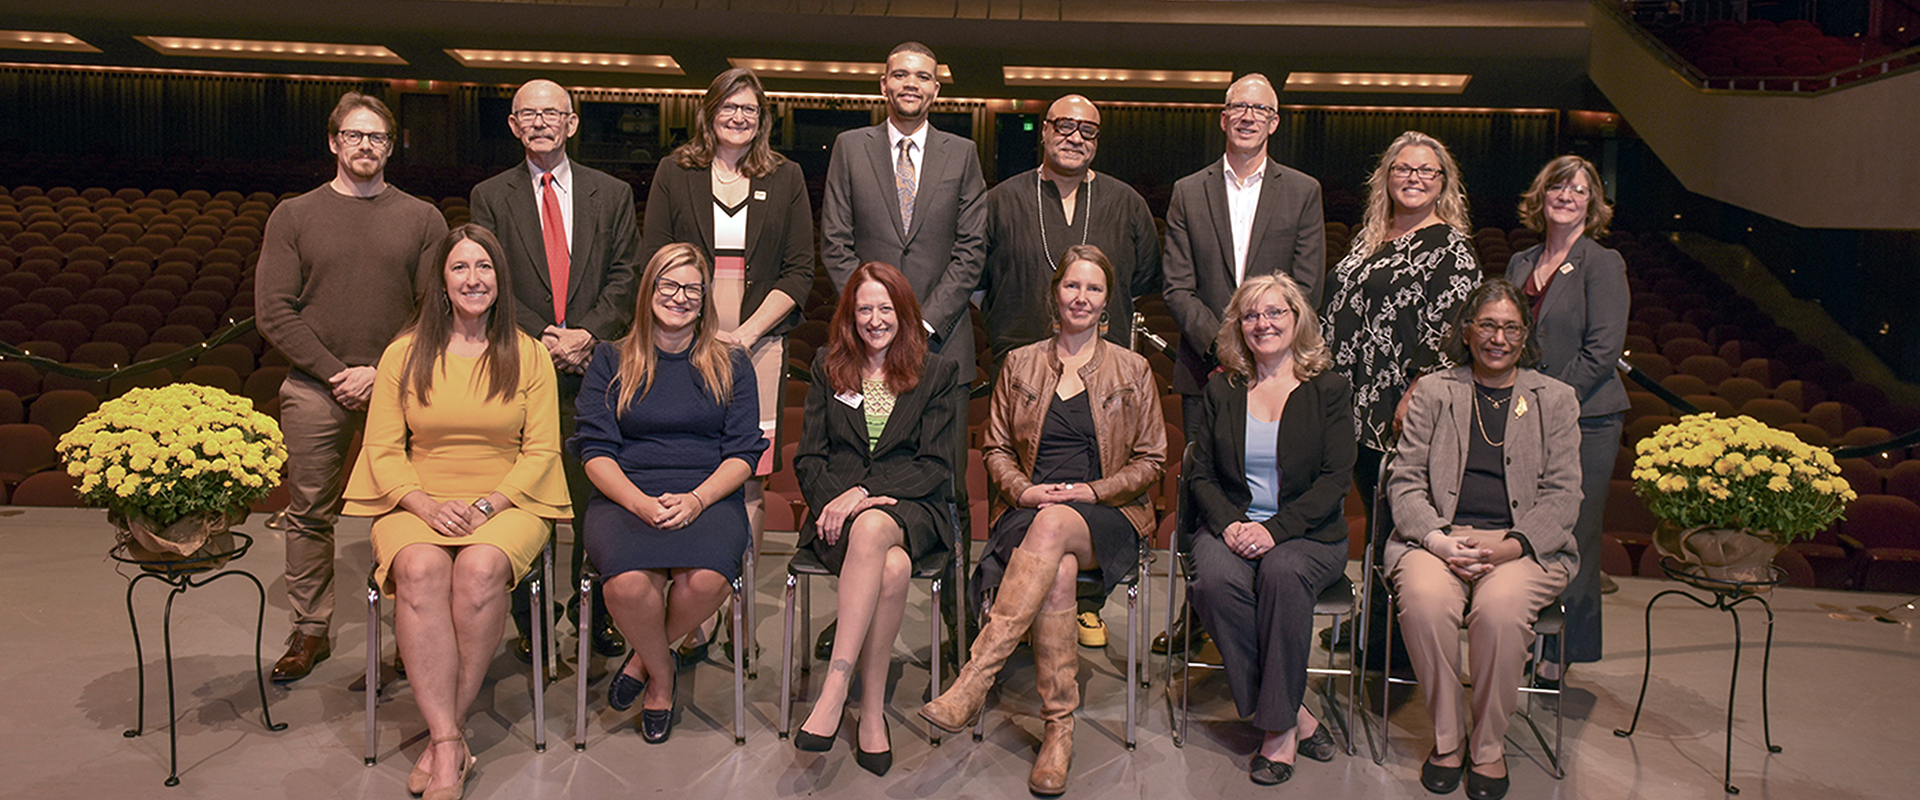 2022 College of Arts and Sciences Alumni Achievement Award honoree group photo